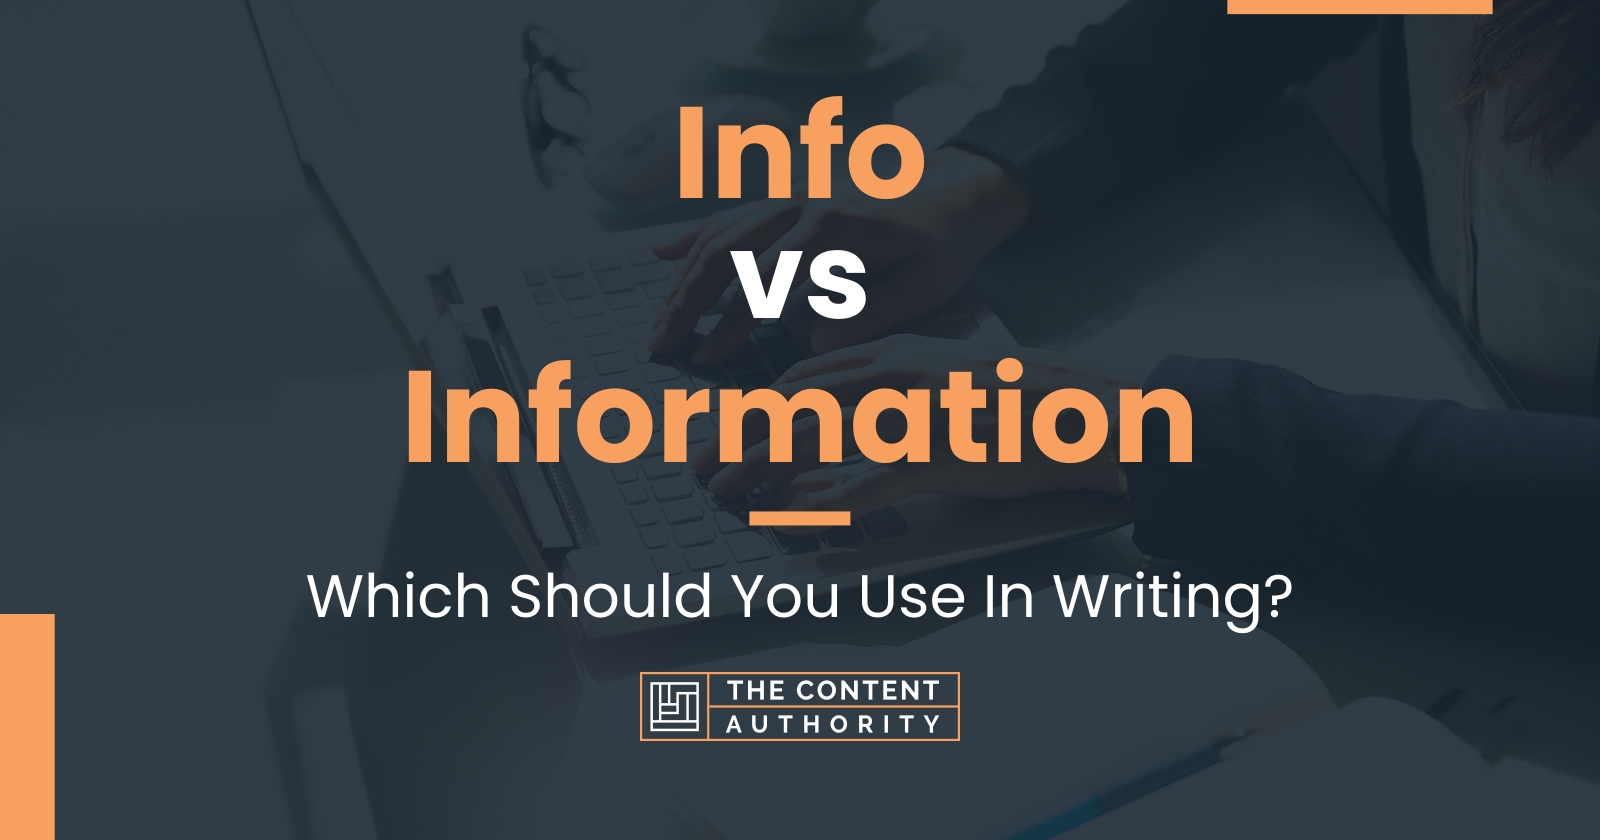 Info vs Information: Which Should You Use In Writing?